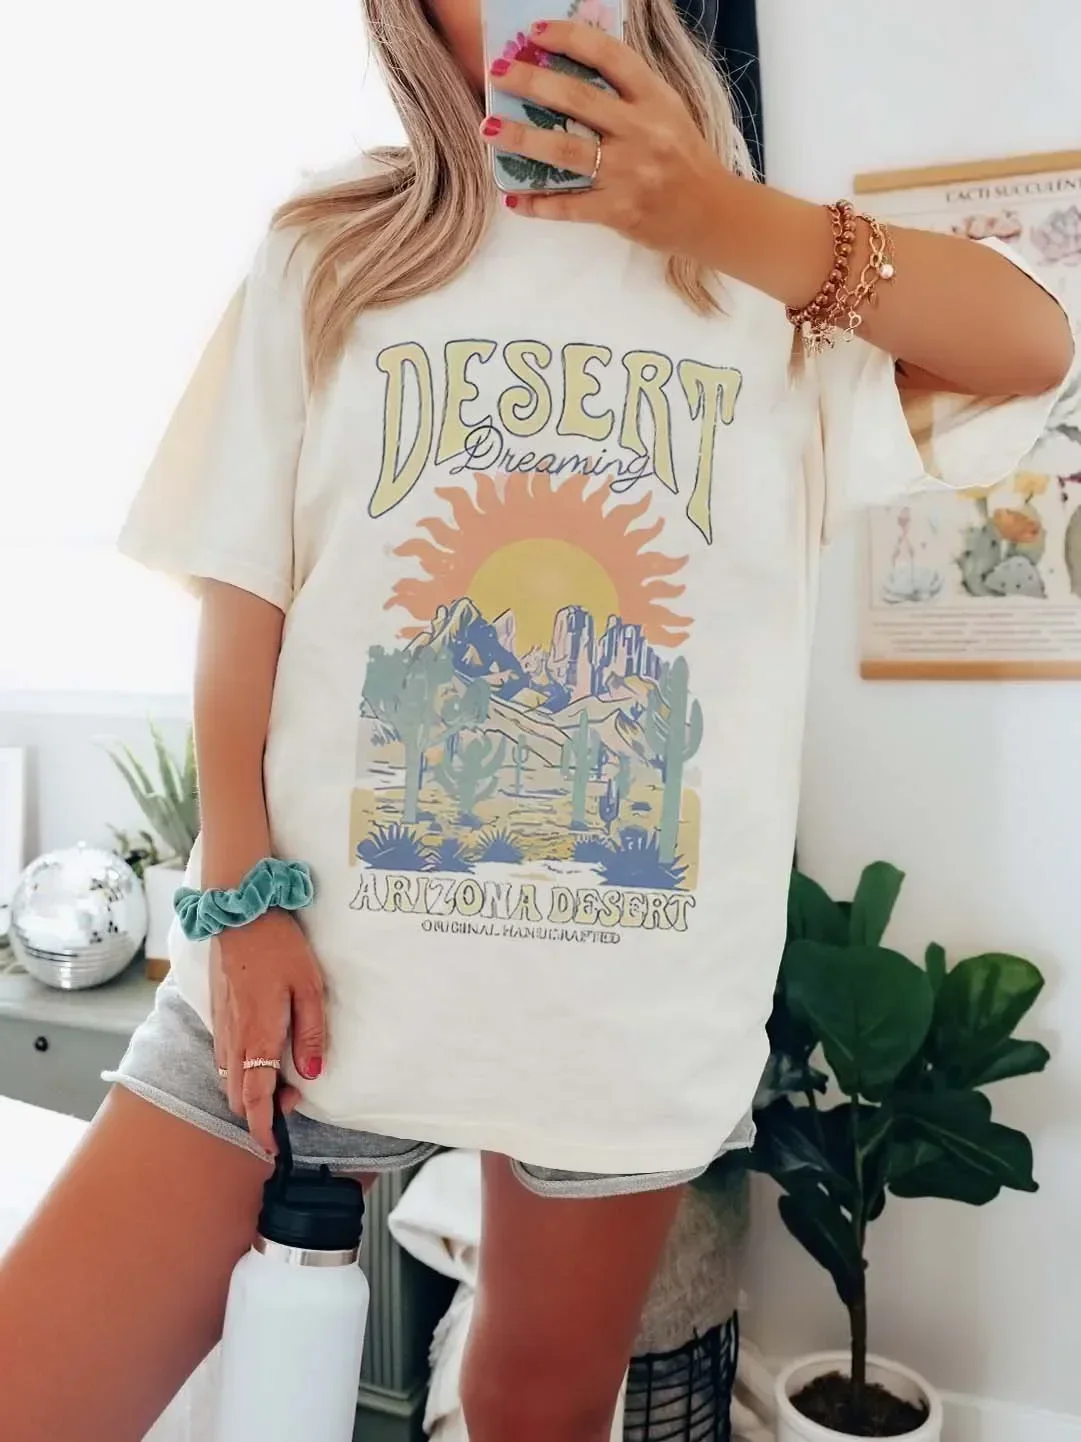 

Fashionable Women's Casual Design Dream Vector Design T-Shirt With Cute 90s Sweet Trend Women's Short Sleeved Printed T-Shirt.